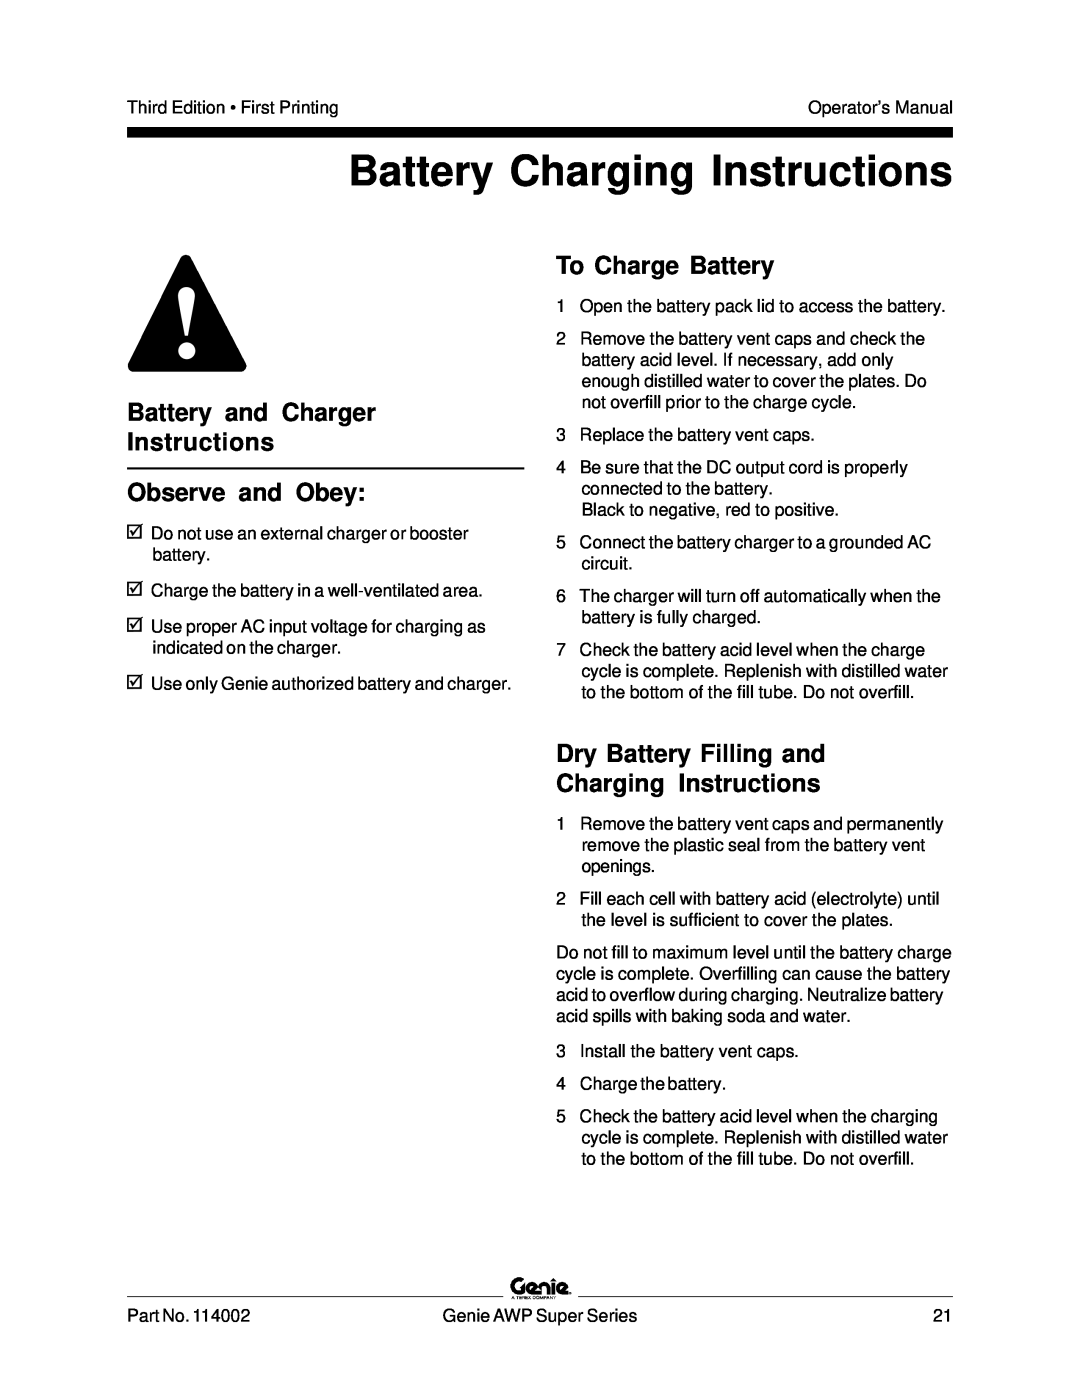 Genie 114002 manual Battery Charging Instructions, Battery and Charger Instructions Observe and Obey, To Charge Battery 